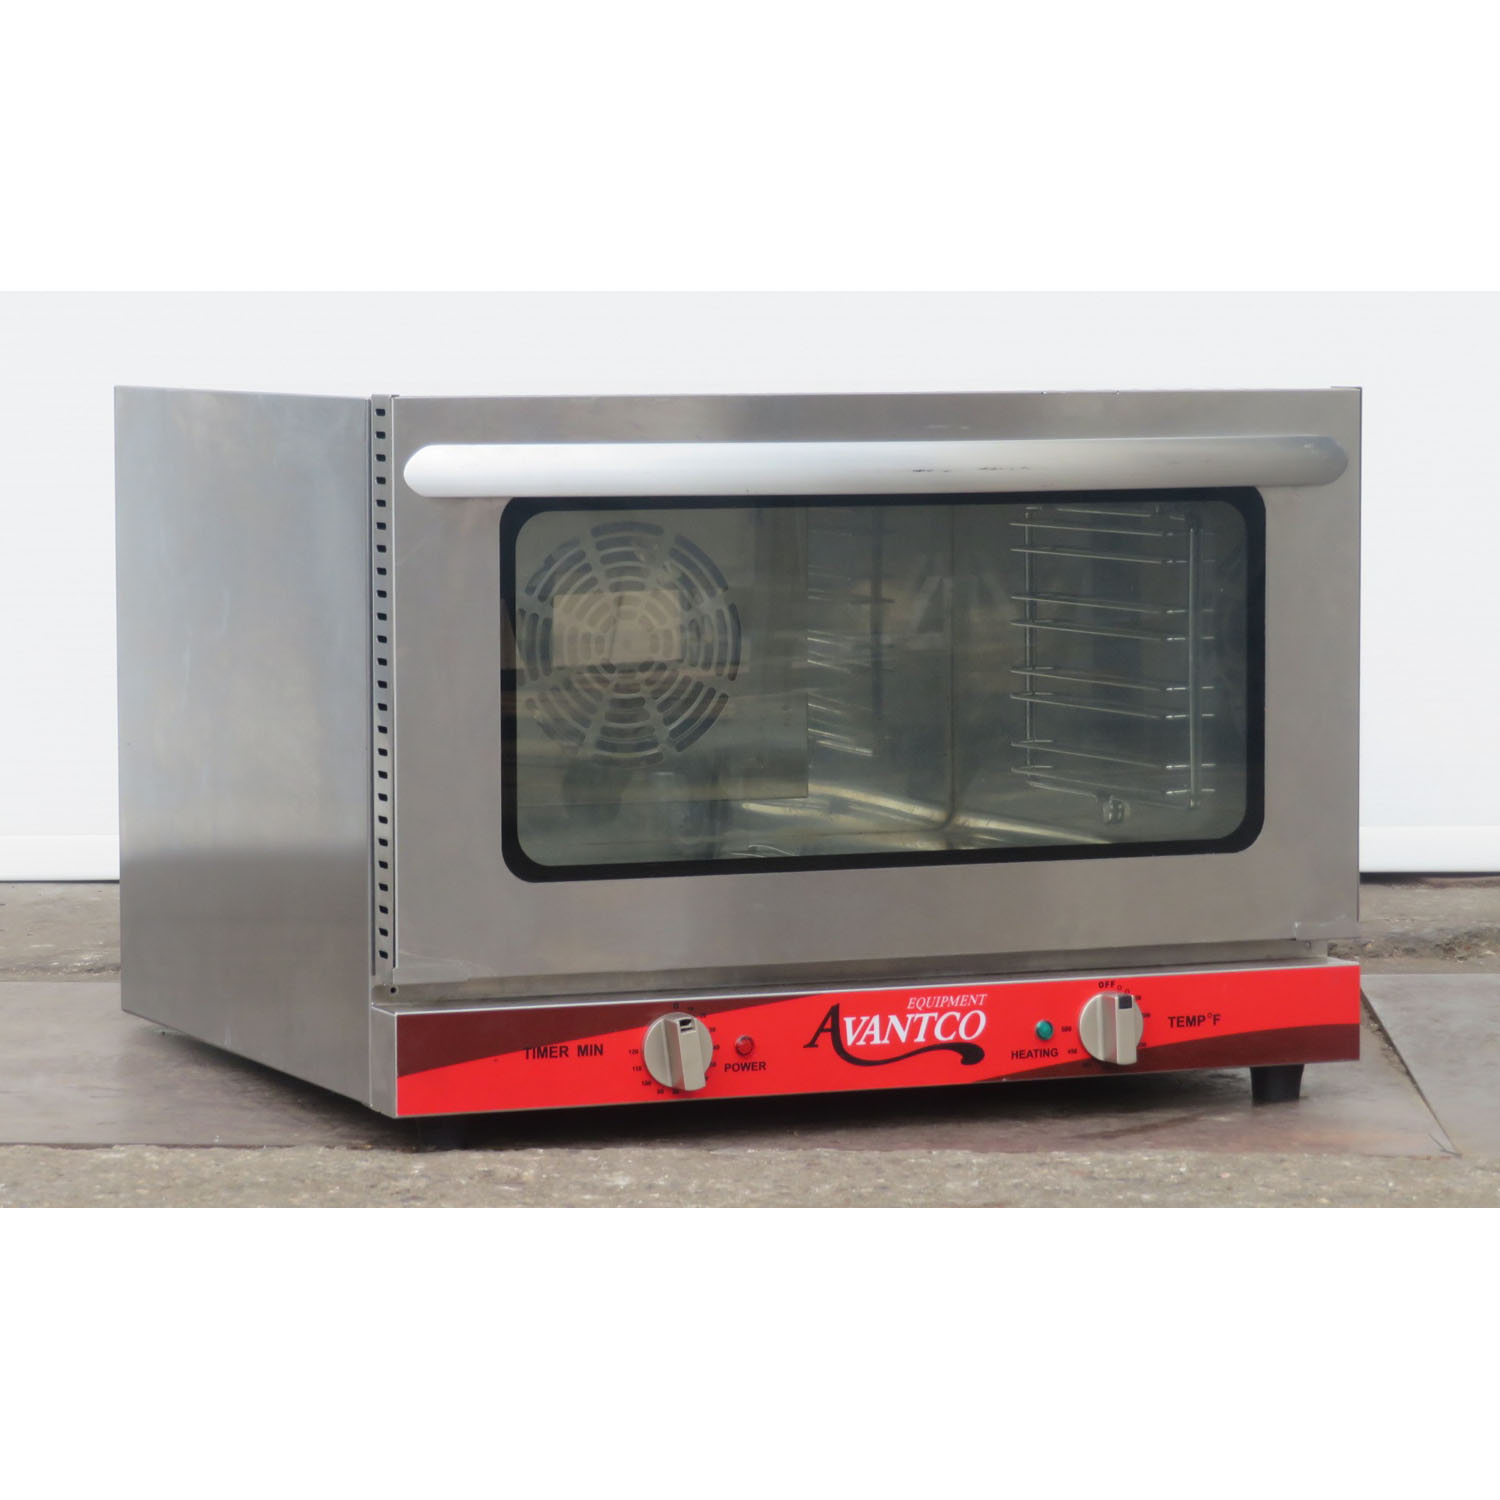 https://www.bakedeco.com/images/large/advantco_co-16_12_size_convection_oven_used_great__64219.JPG